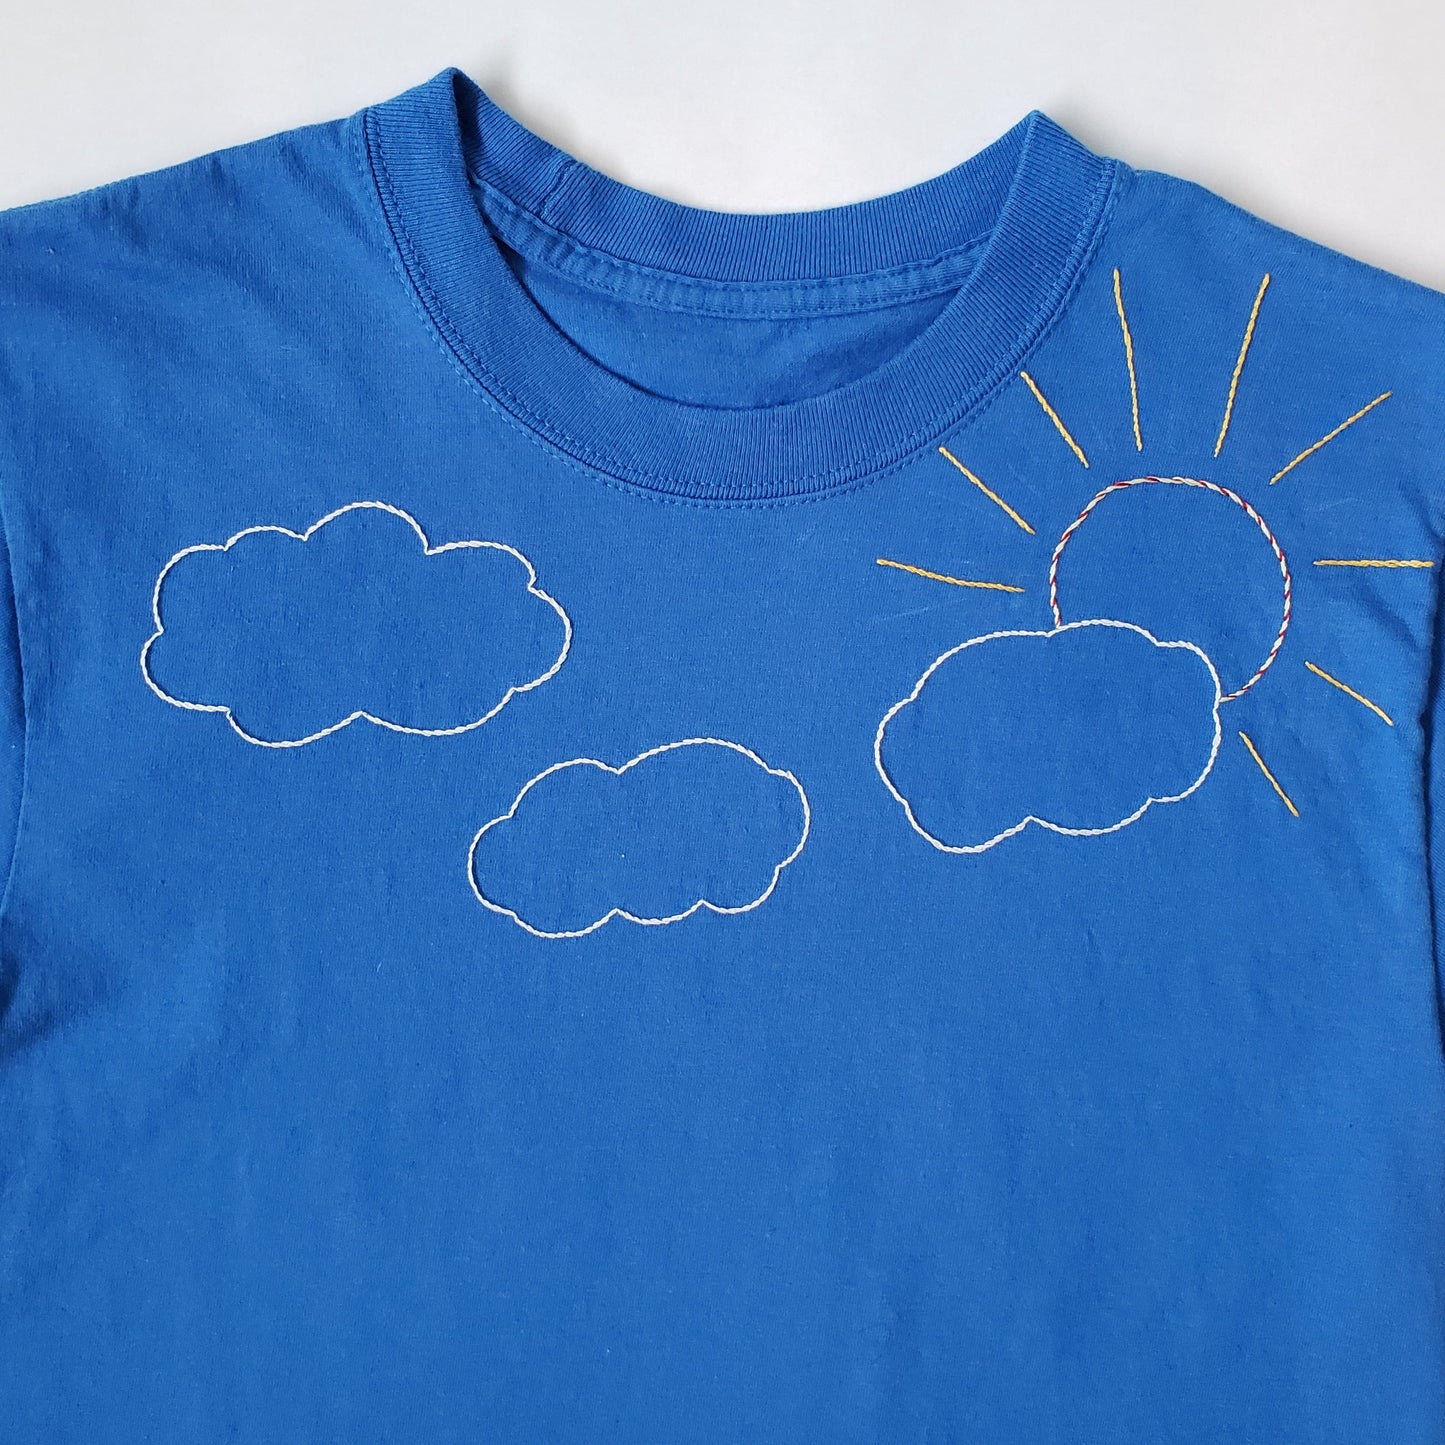 A close up of the embroidery on the chest of the front of the blue crewneck tee. There are three white clouds and a sun stitched in yellow, red, and orange in a twisted effect, with yellow rays. The sun pokes out from behind the rightmost cloud.